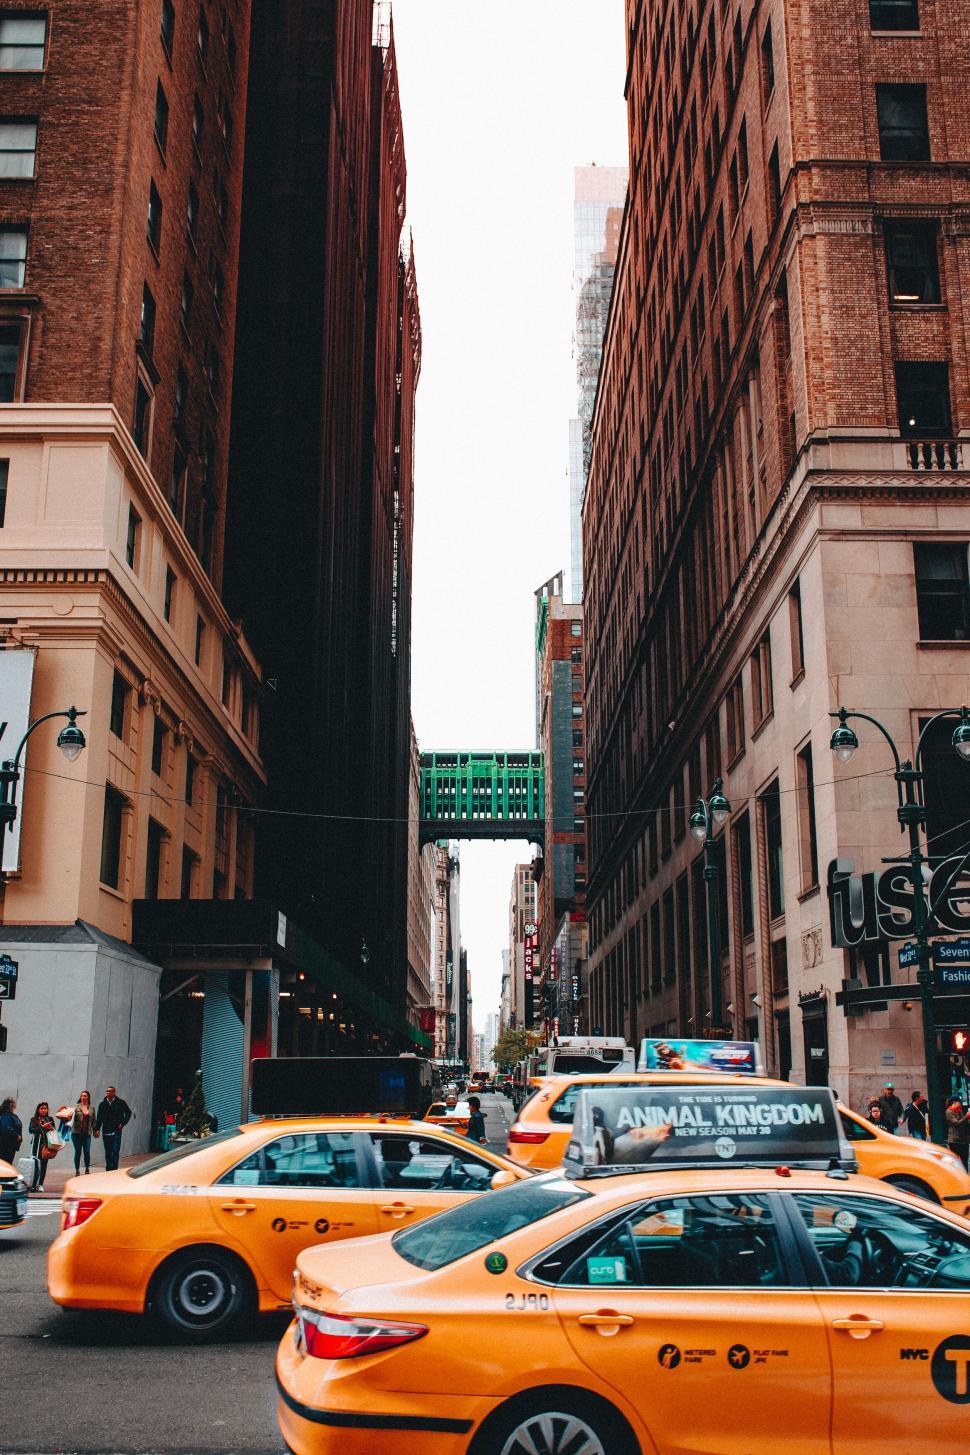 Free Image of Bustling New York street with yellow taxis 